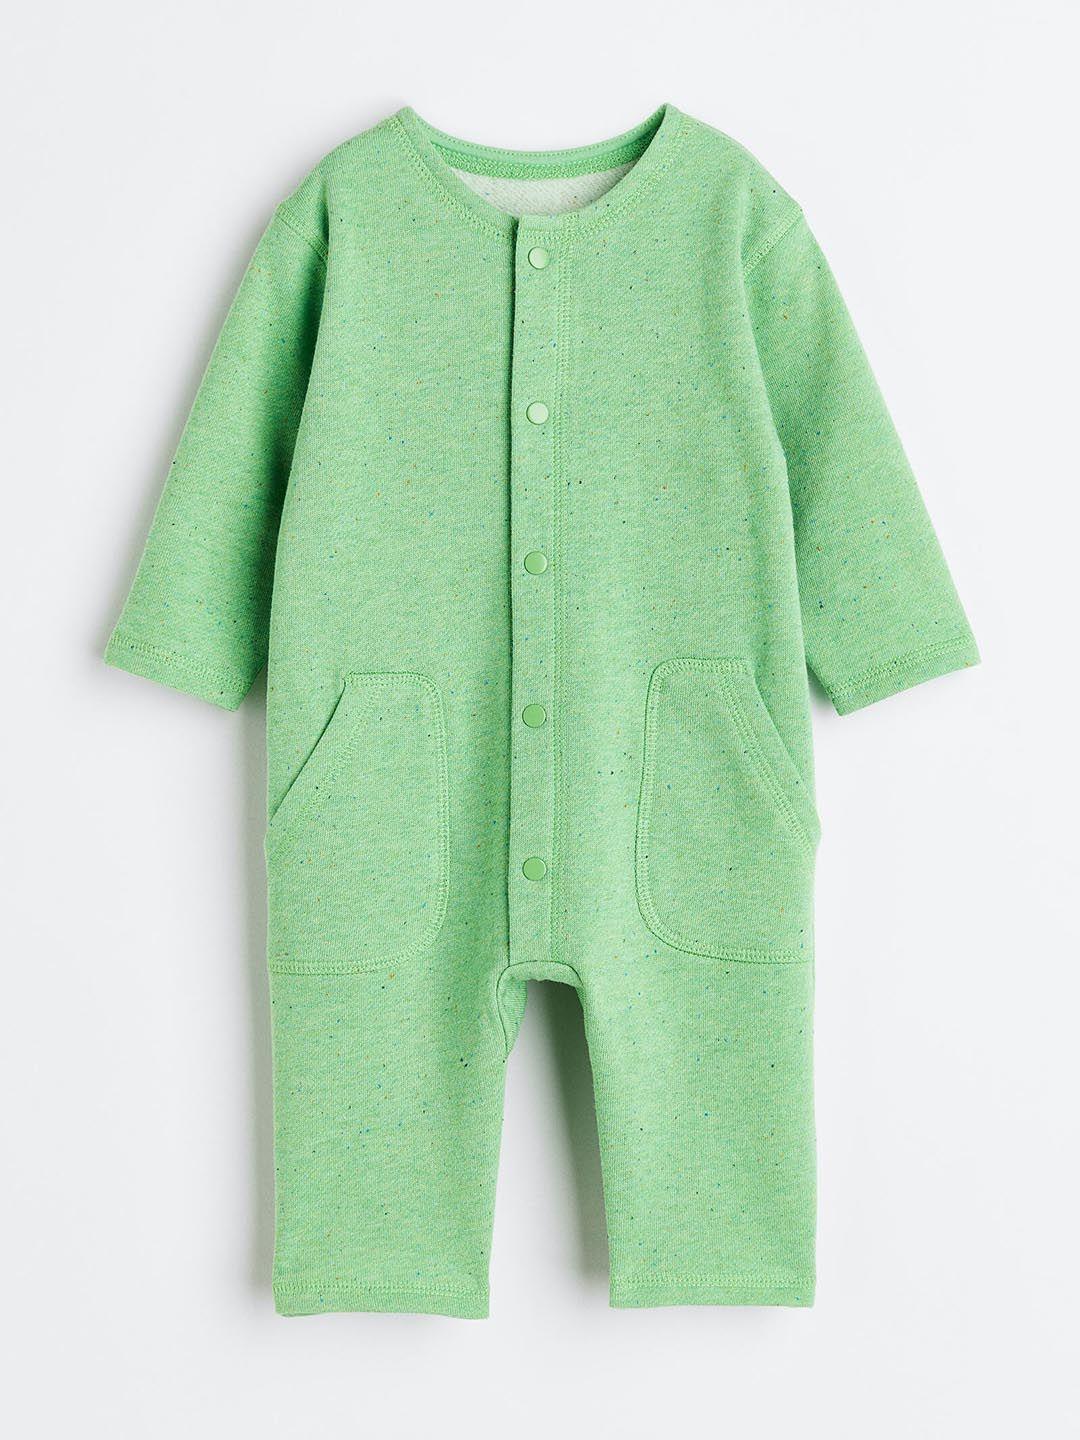 h&m boys quilted pure cotton jersey romper suit